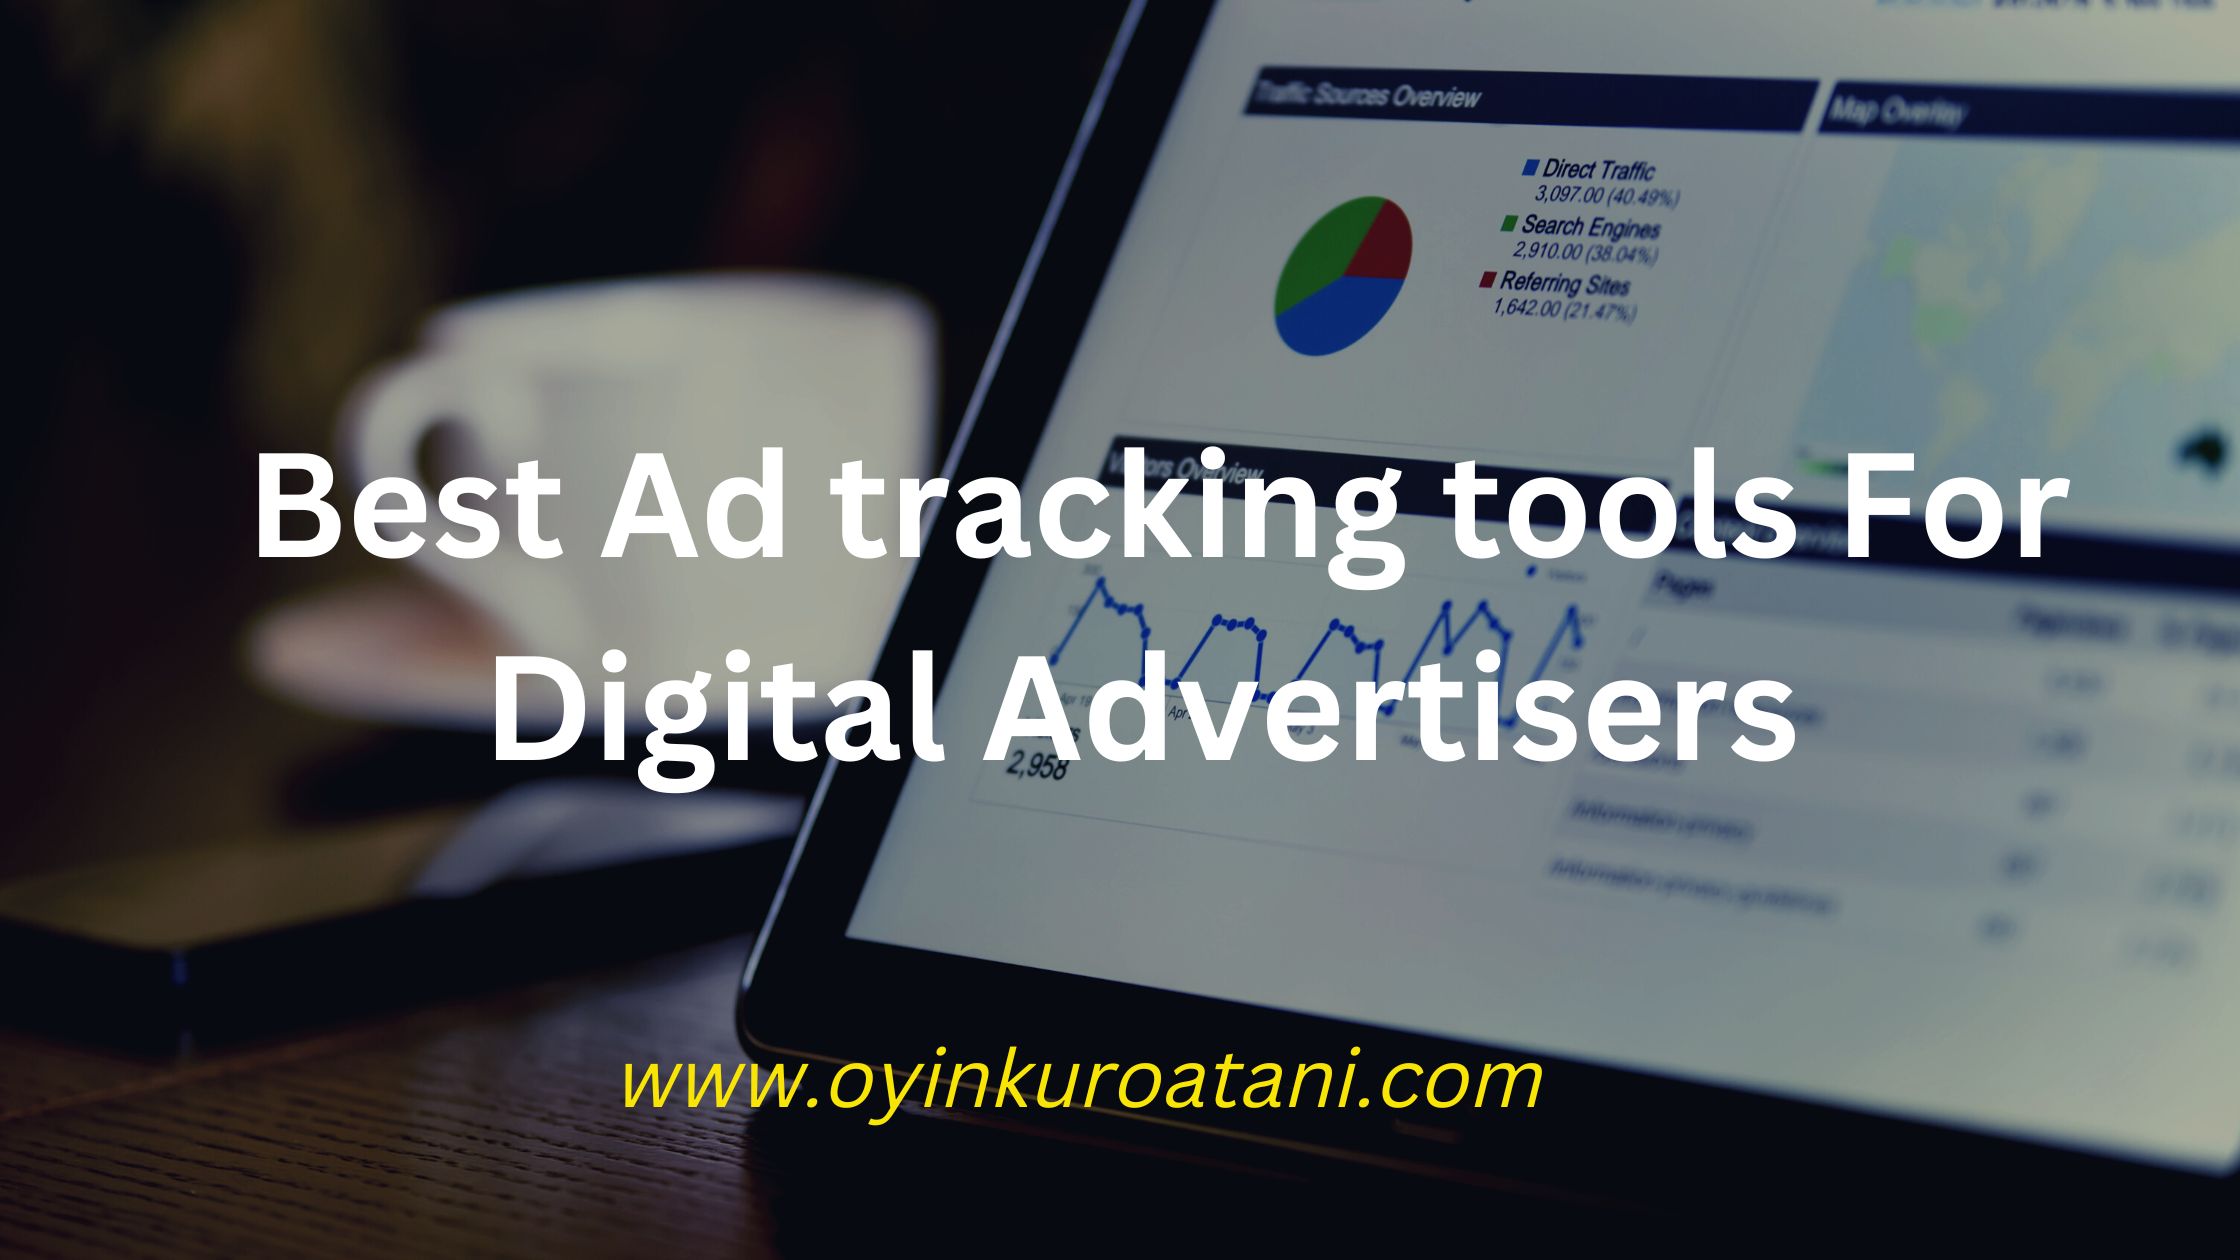 Best Ad tracking tools For Digital Advertisers